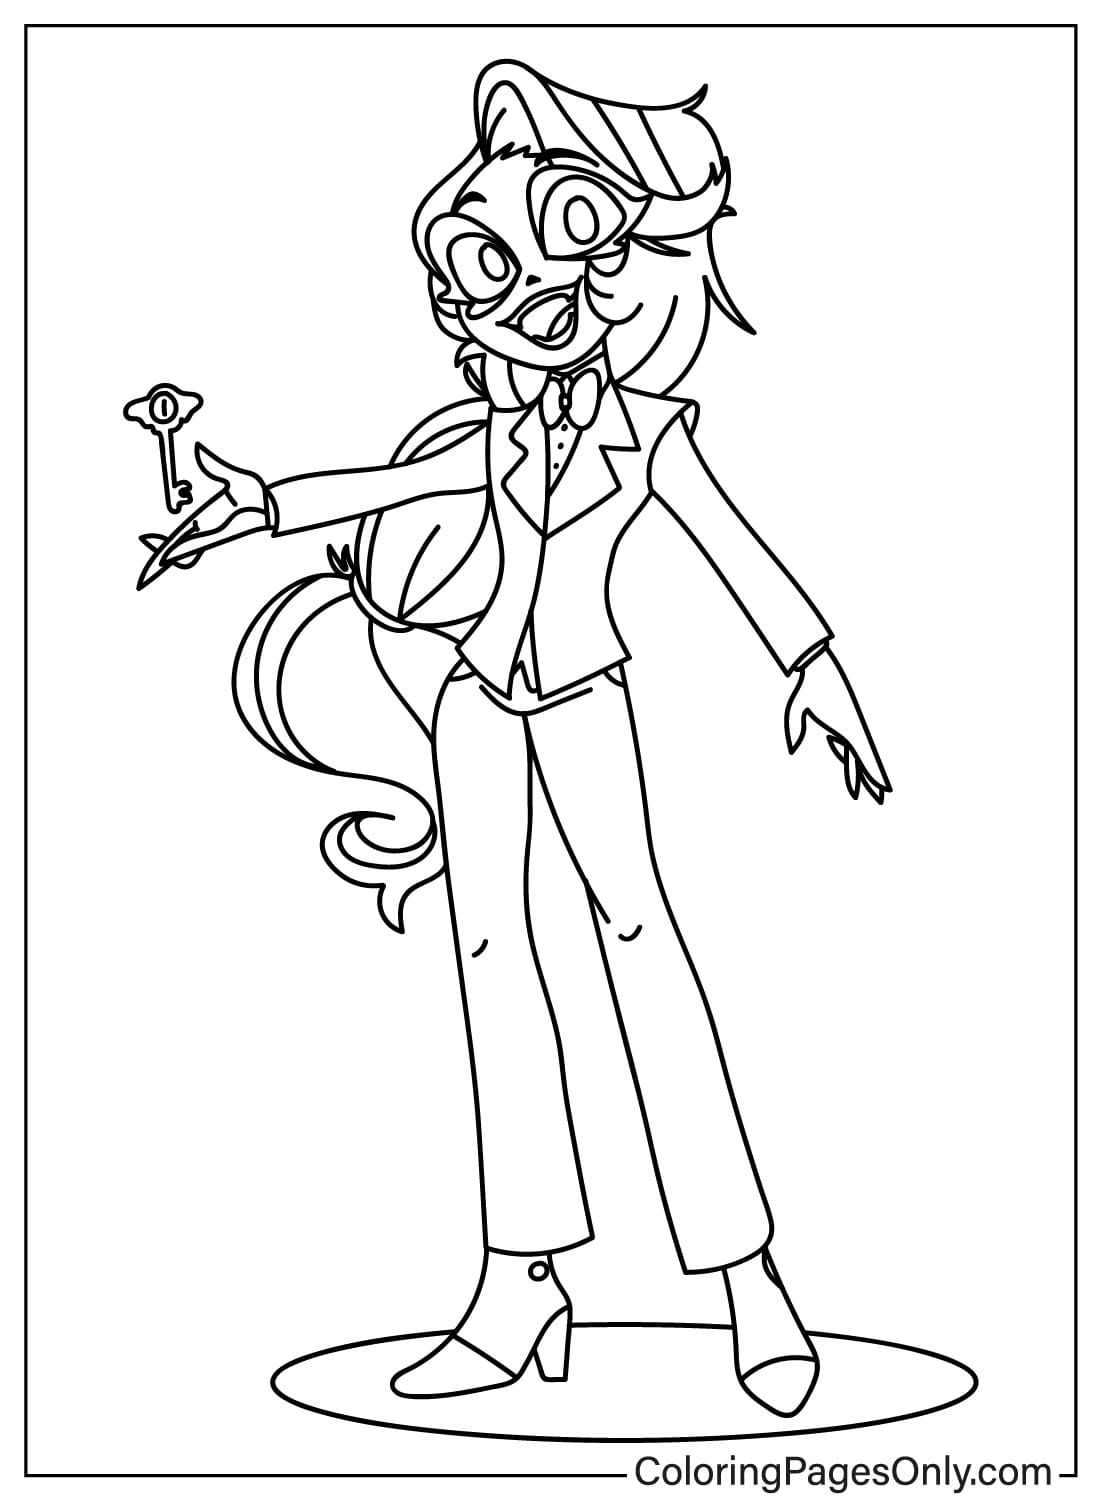 Charlie Coloring Page from Charlie Morningstar